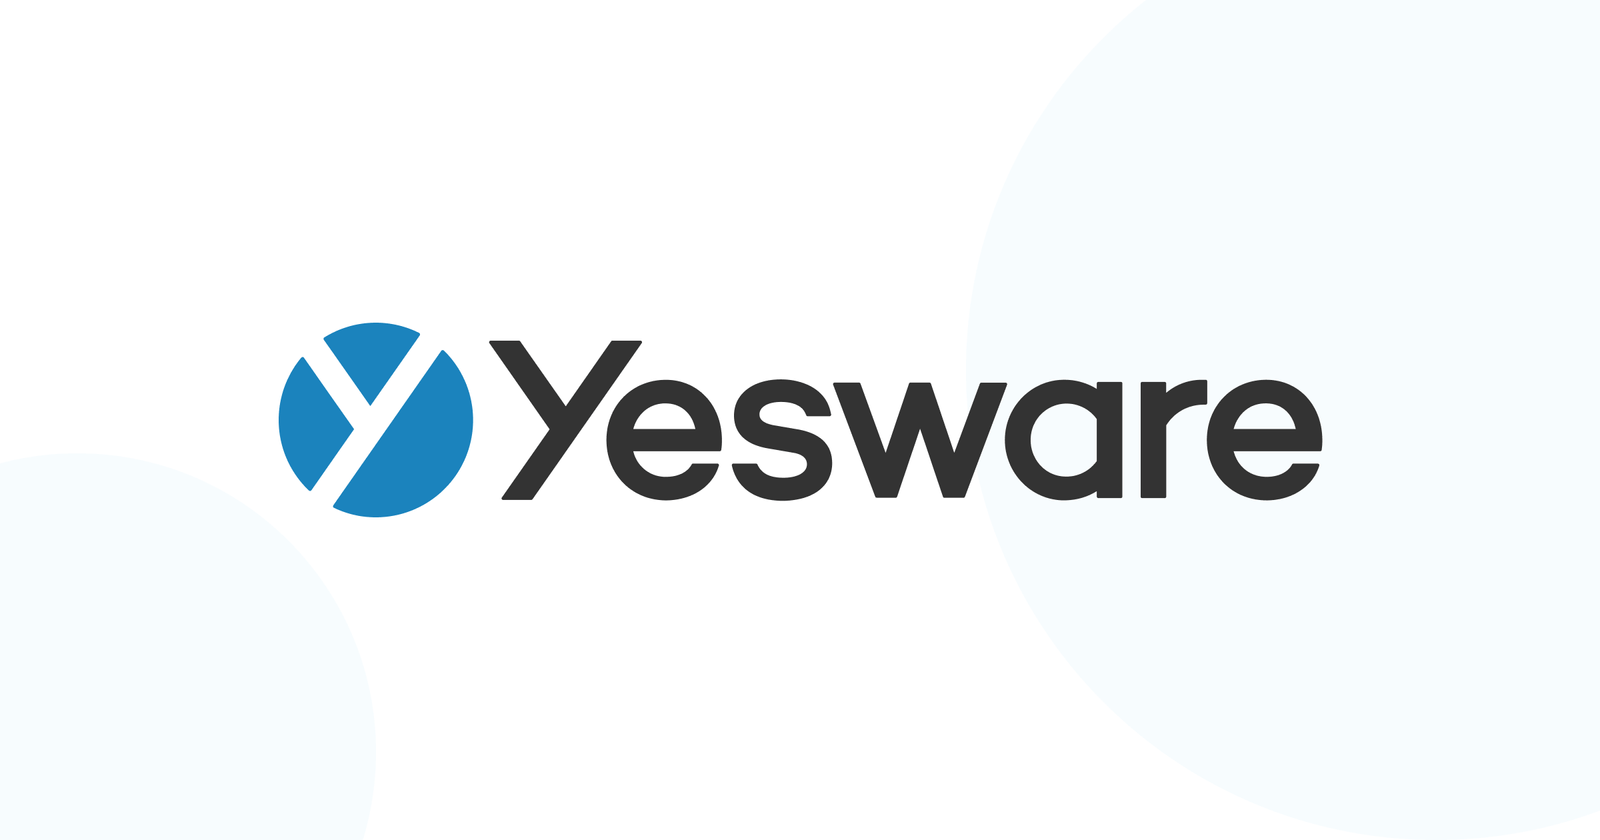 Yesware - review, pricing, alternatives, features, details